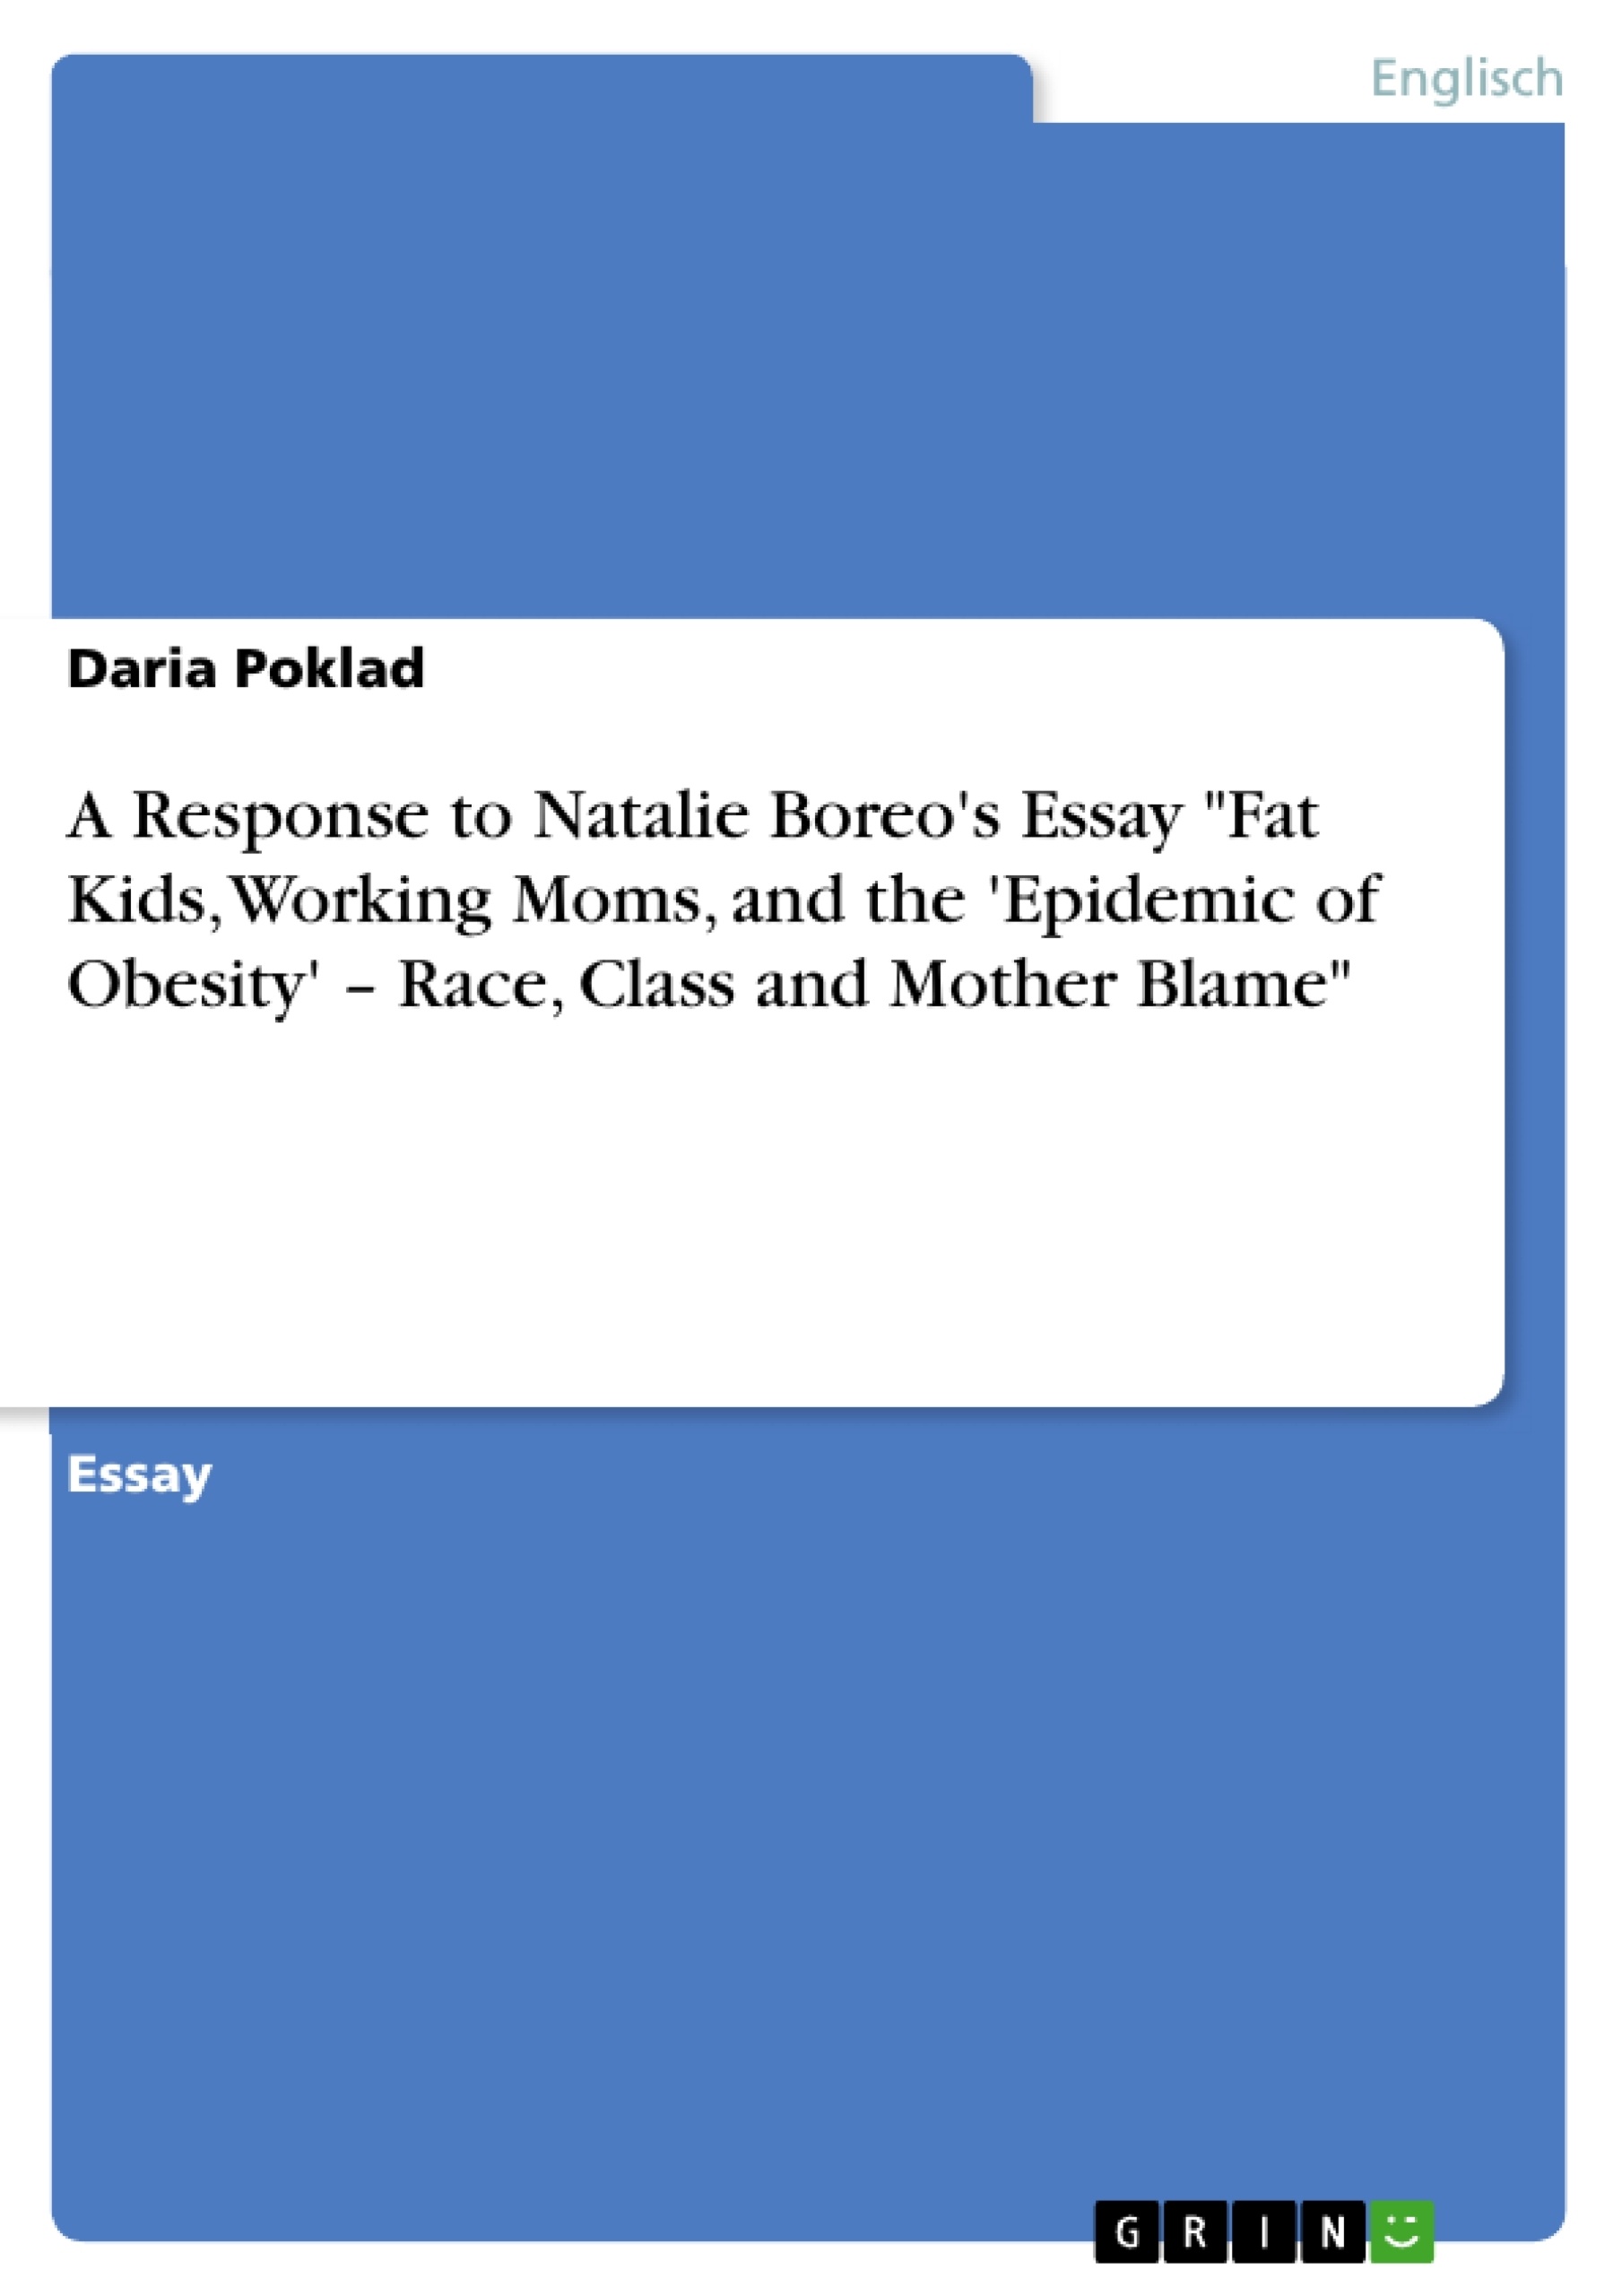 Titel: A Response to Natalie Boreo's Essay "Fat Kids, Working Moms, and the 'Epidemic of Obesity' – Race, Class and Mother Blame"